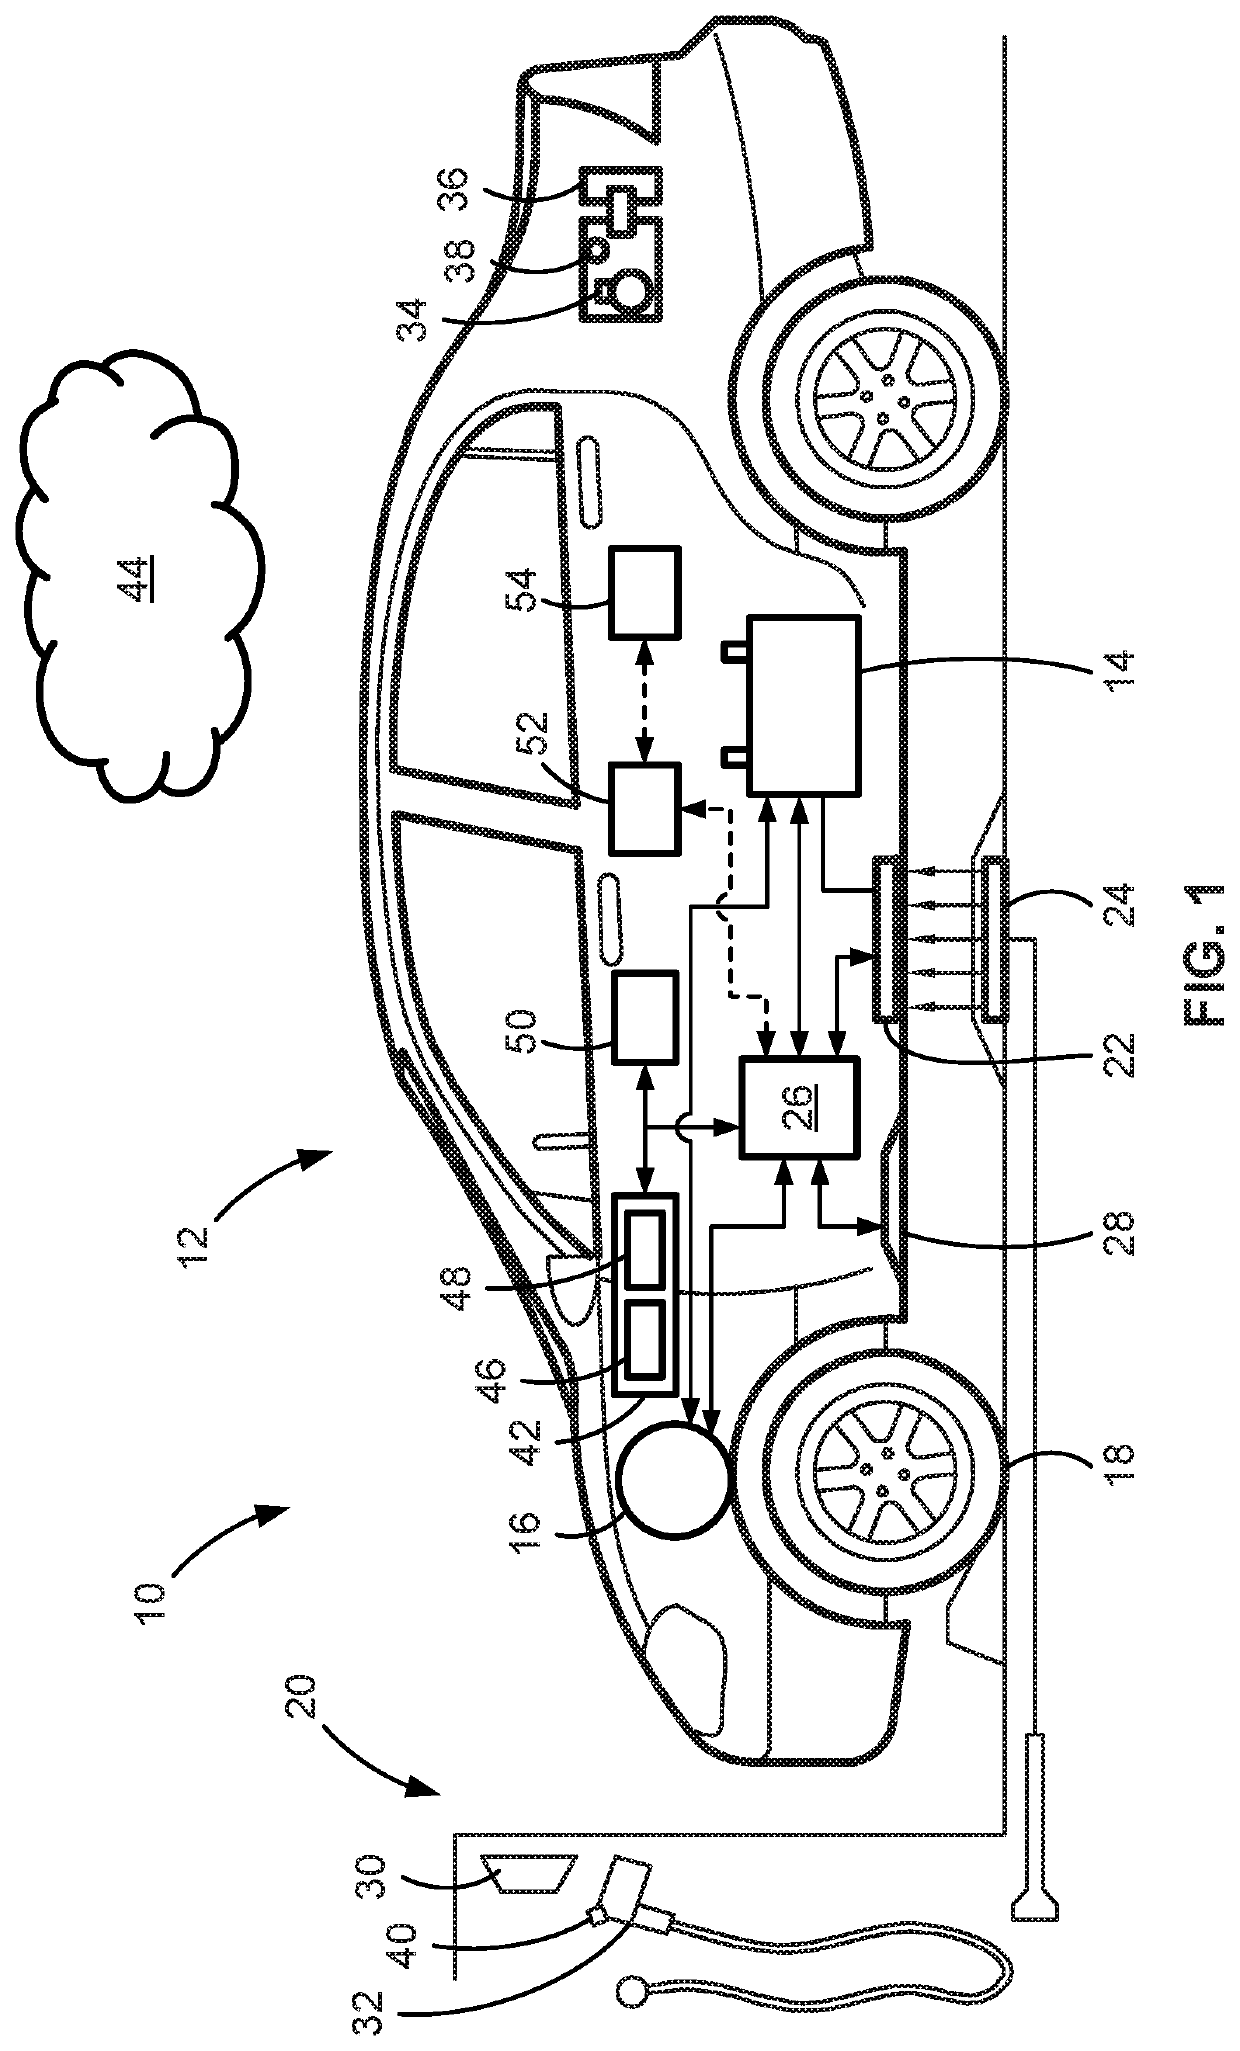 Intelligent motor vehicles, charging systems, and control logic for governing vehicle grid integration operations